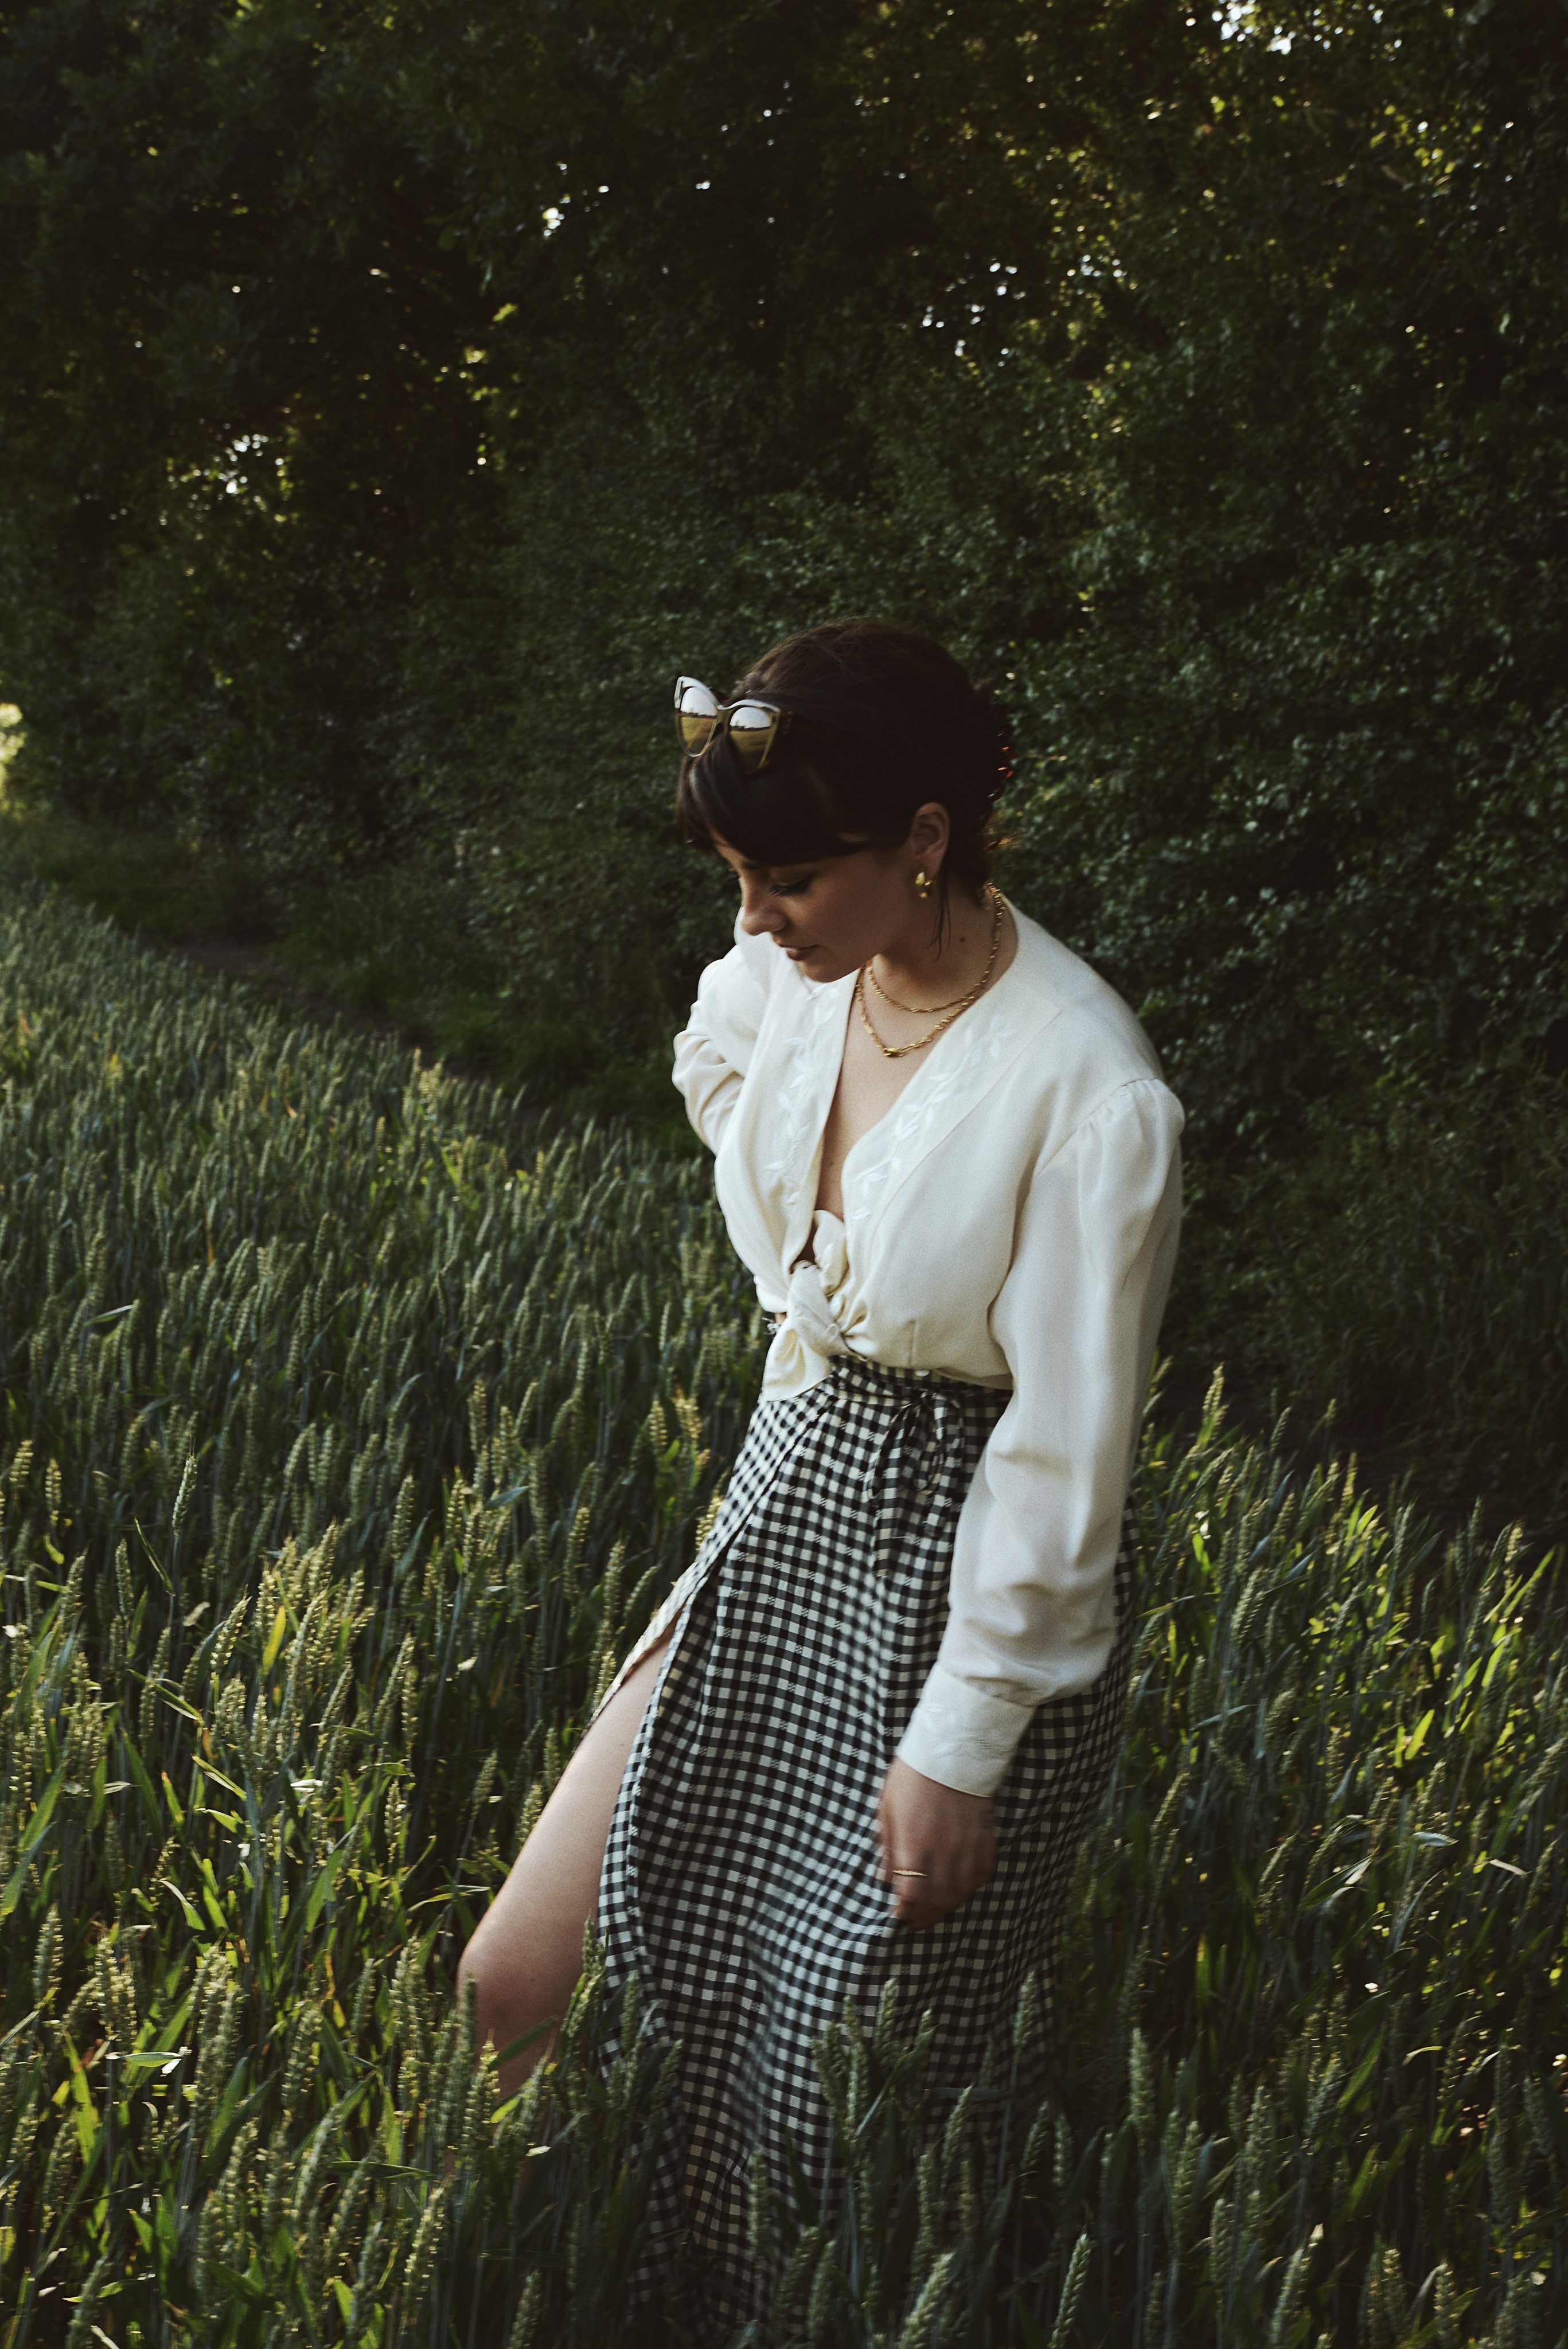 A VINTAGE OUTFIT IN A FIELD – Alice Catherine